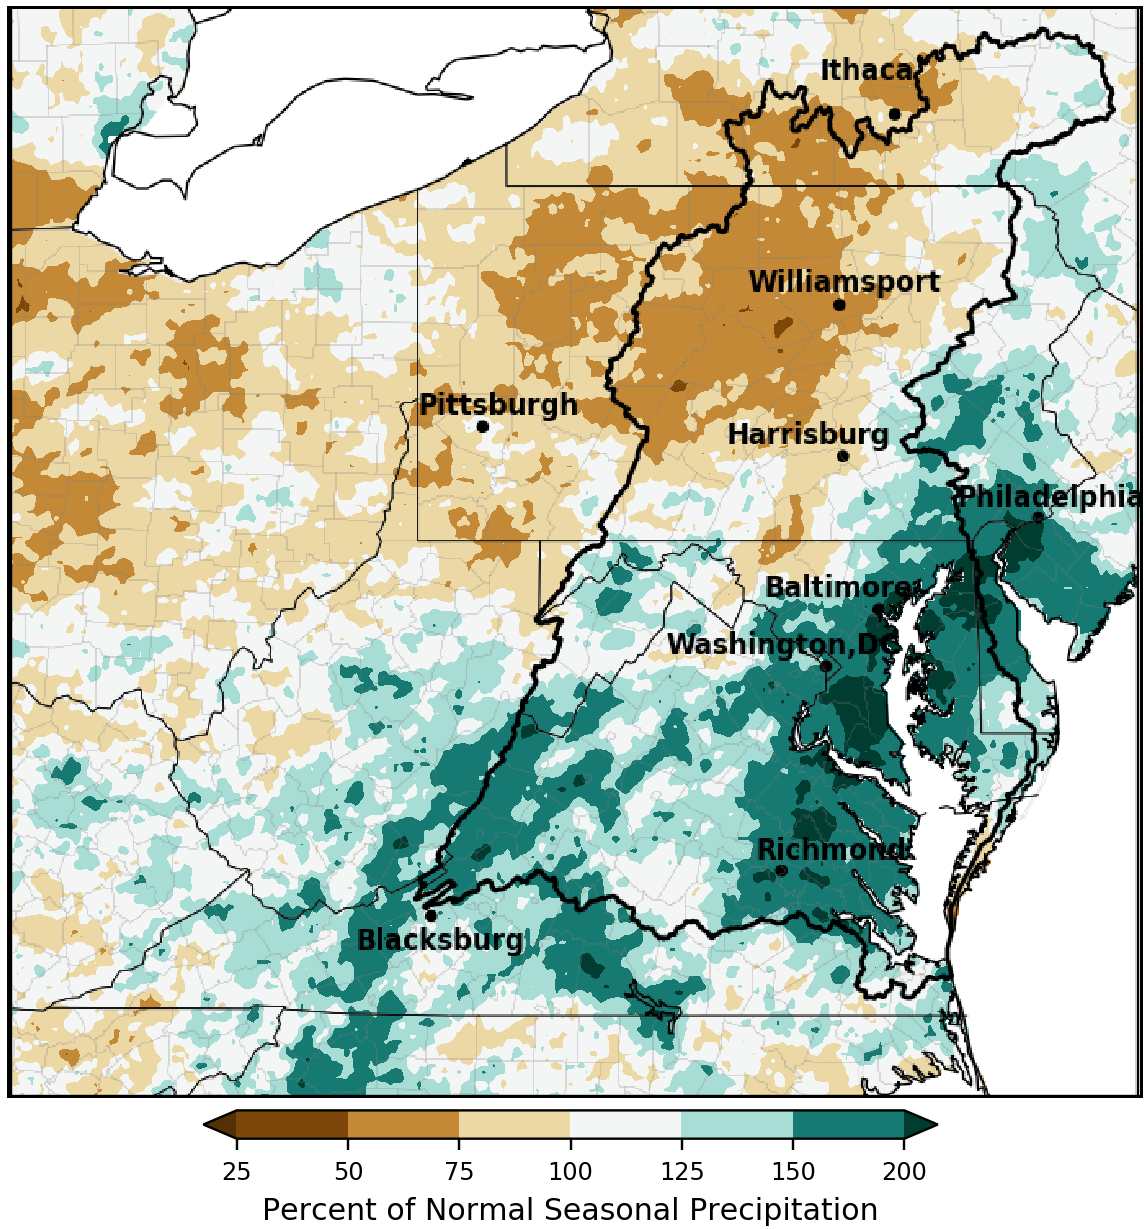 A map of precipitation deviation from norm in the Mid-Atlantic region.